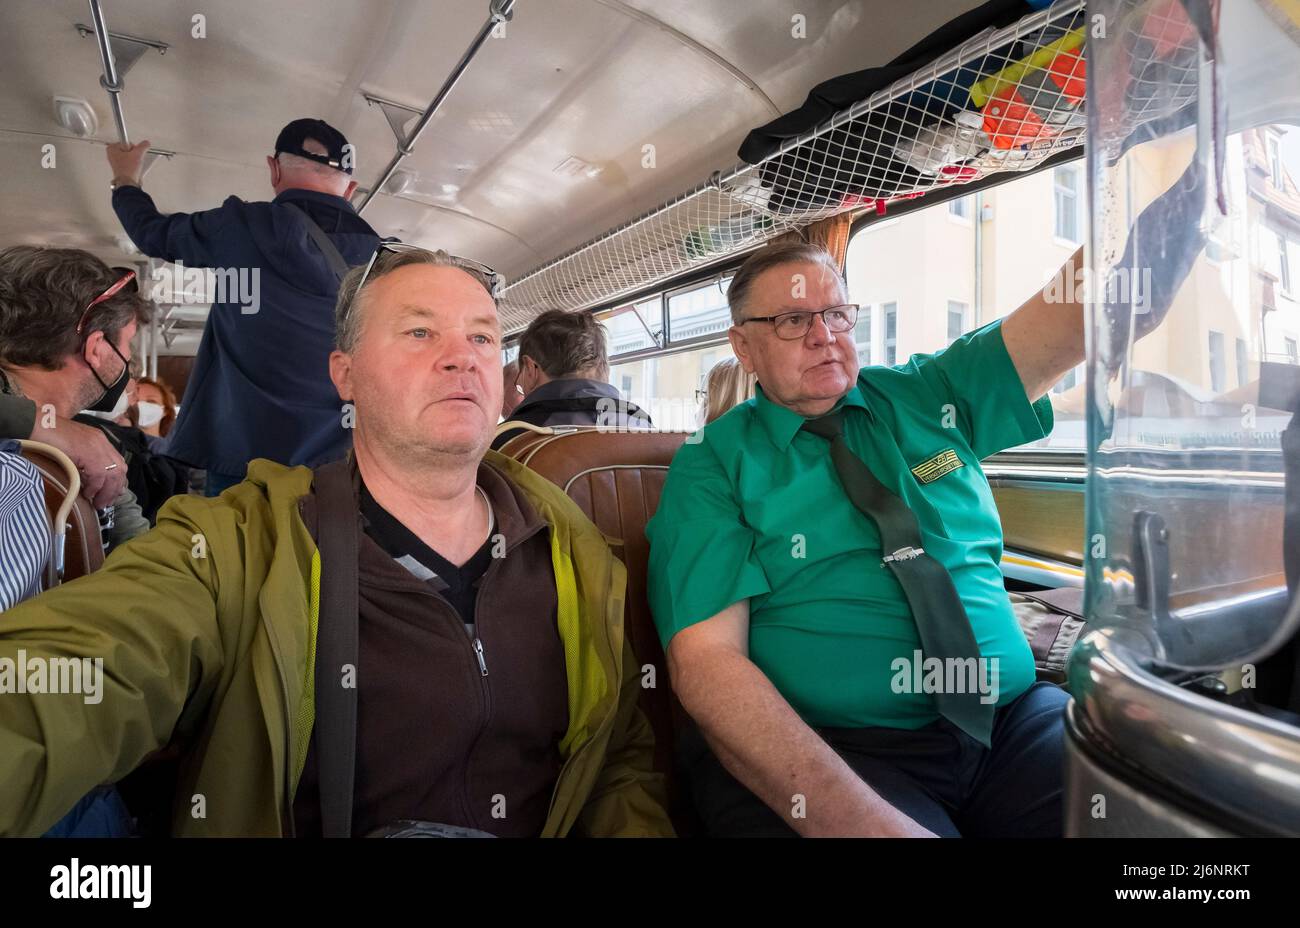 03 May 2022, Saxony, Dresden: Passengers and transport company employees ride in an 'Ikarus 66'. The bus was built in the Hungarian Ikarus factories in 1972, has 190 hp and was in regular service in Dresden until 1985. A total of 3 historic buses of the Historisches Kraftfahrzeuge des Dresdner Nahverkehrs e. V. are on the road in Dresden this week on the occasion of the 20th anniversary of the association. Photo: Matthias Rietschel/dpa-Zentralbild/dpa Stock Photo